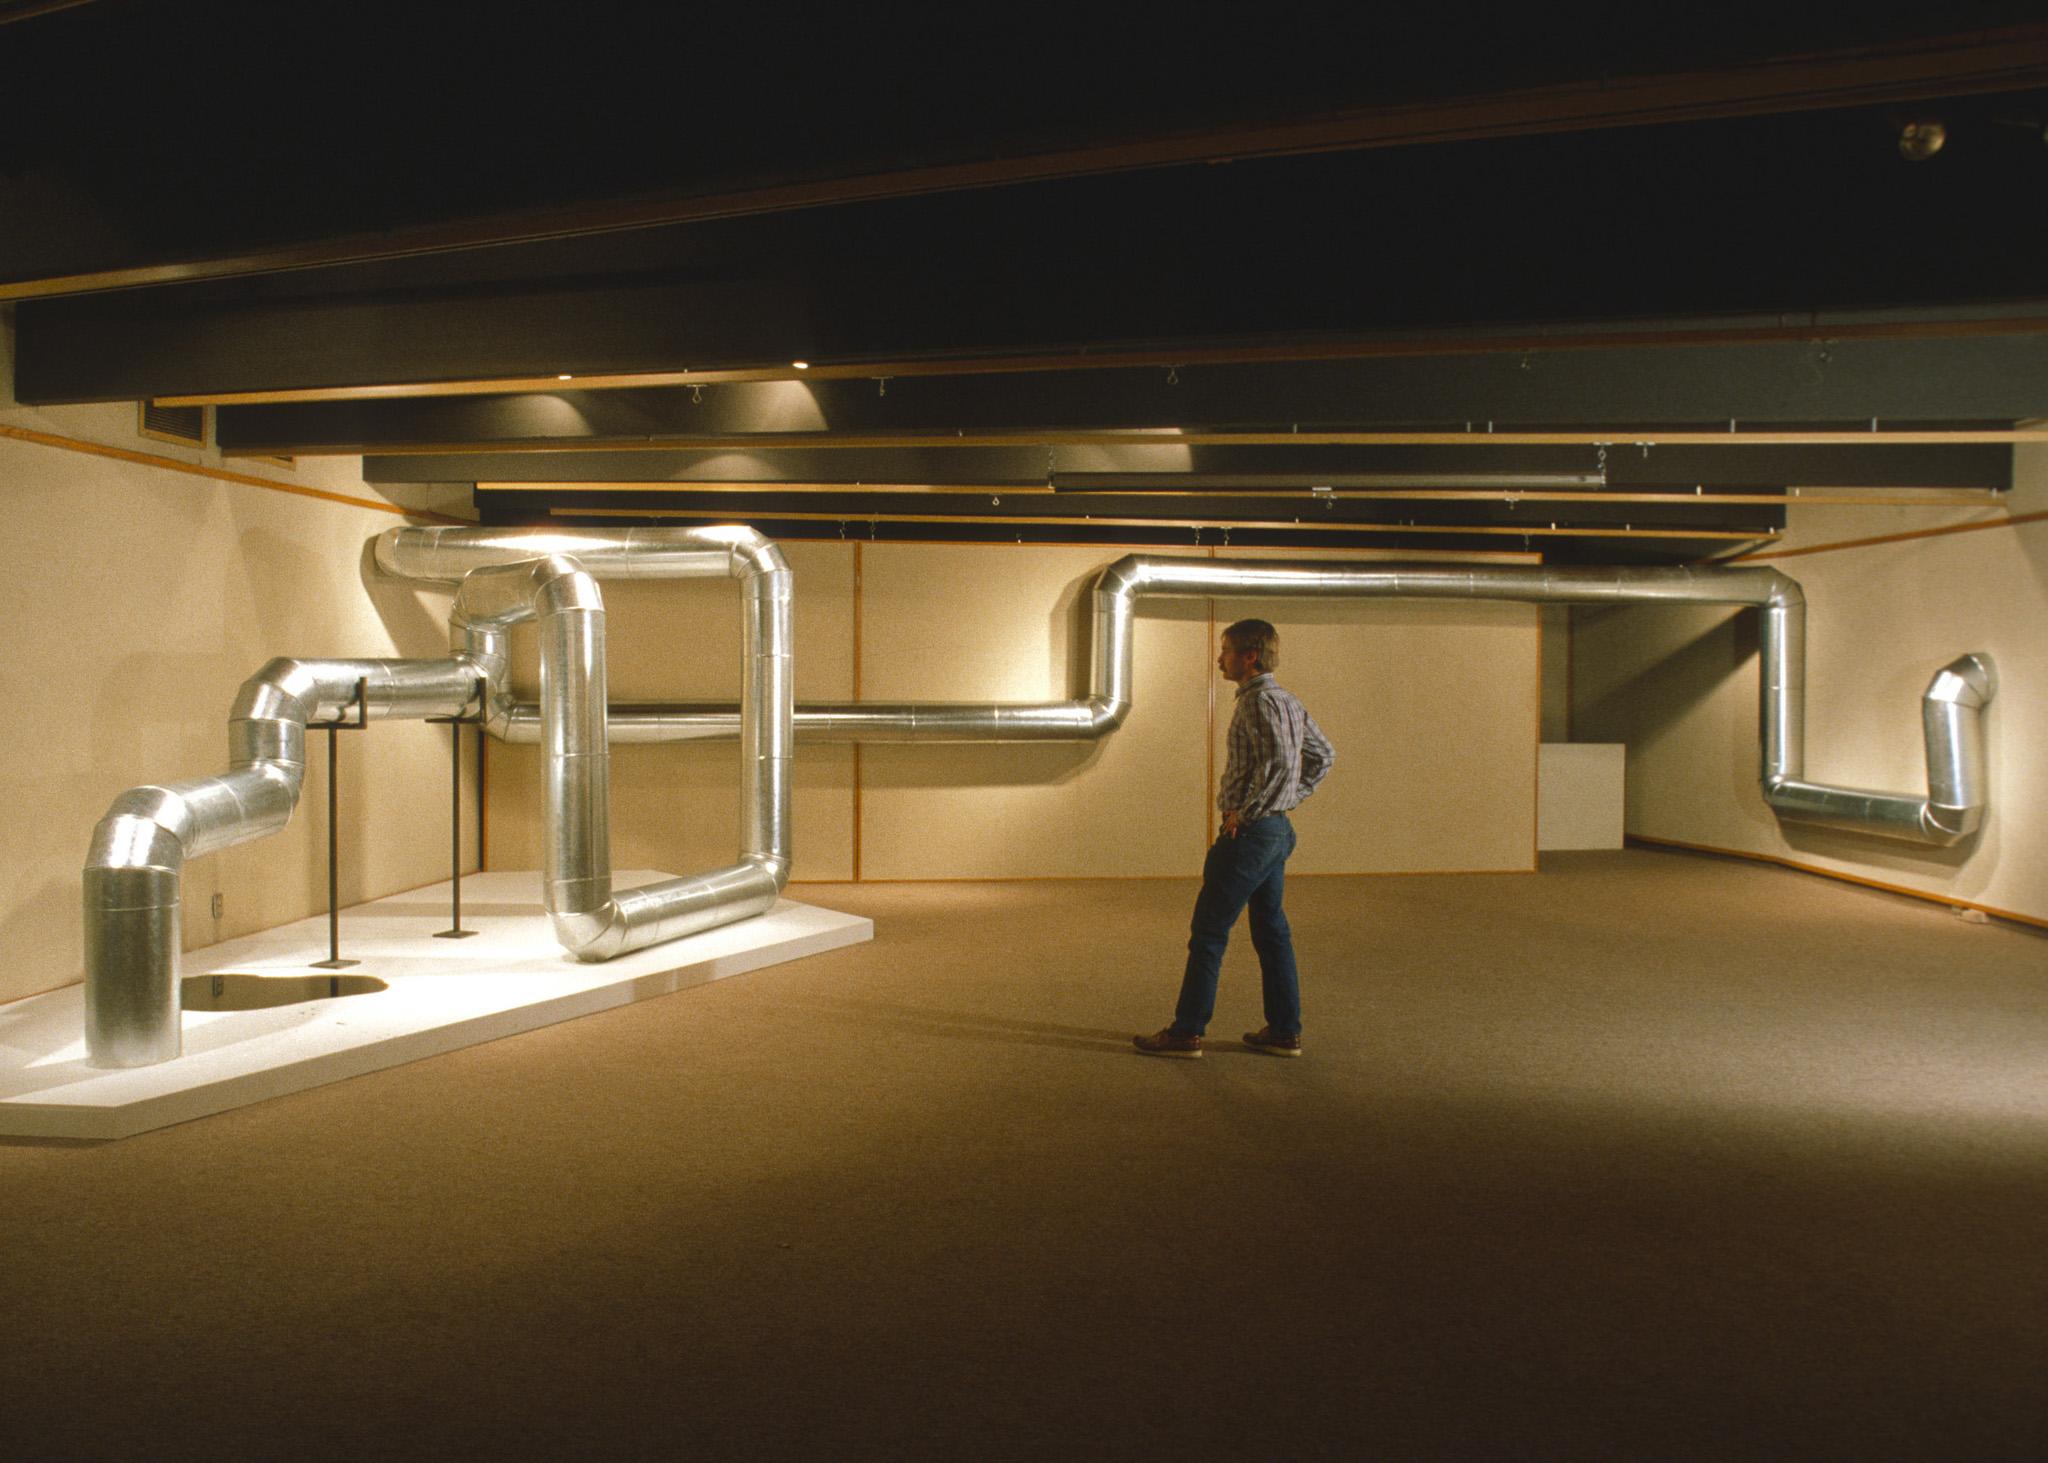 a person stands next to a sculpture made of steel duct that zig zags through the air and along the walls in a basement gallery space